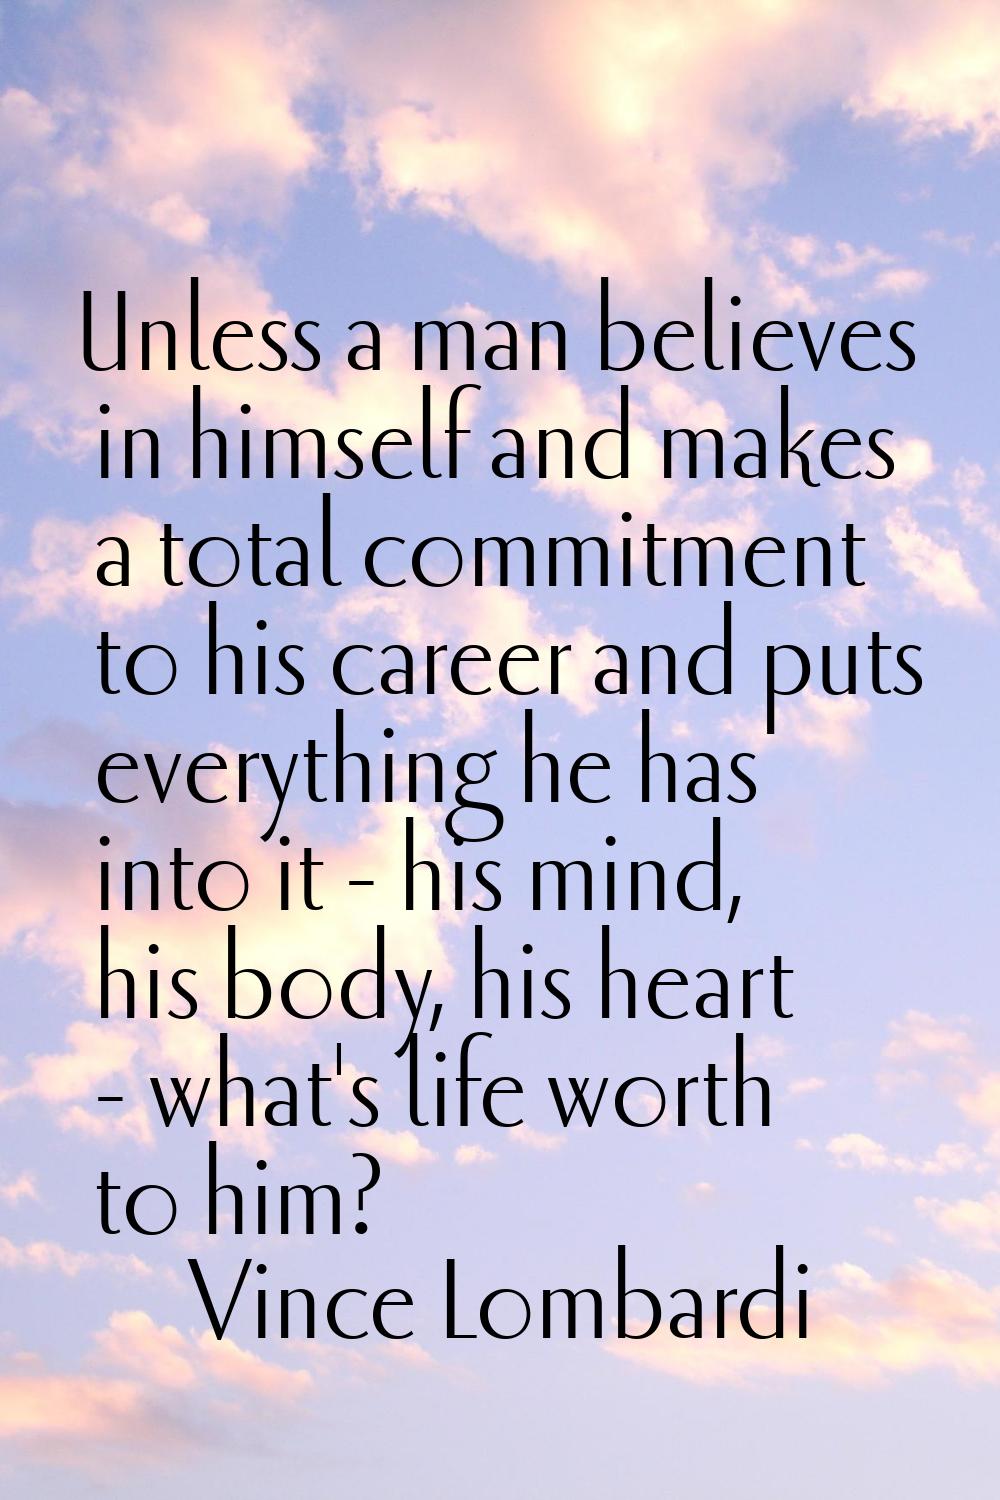 Unless a man believes in himself and makes a total commitment to his career and puts everything he 